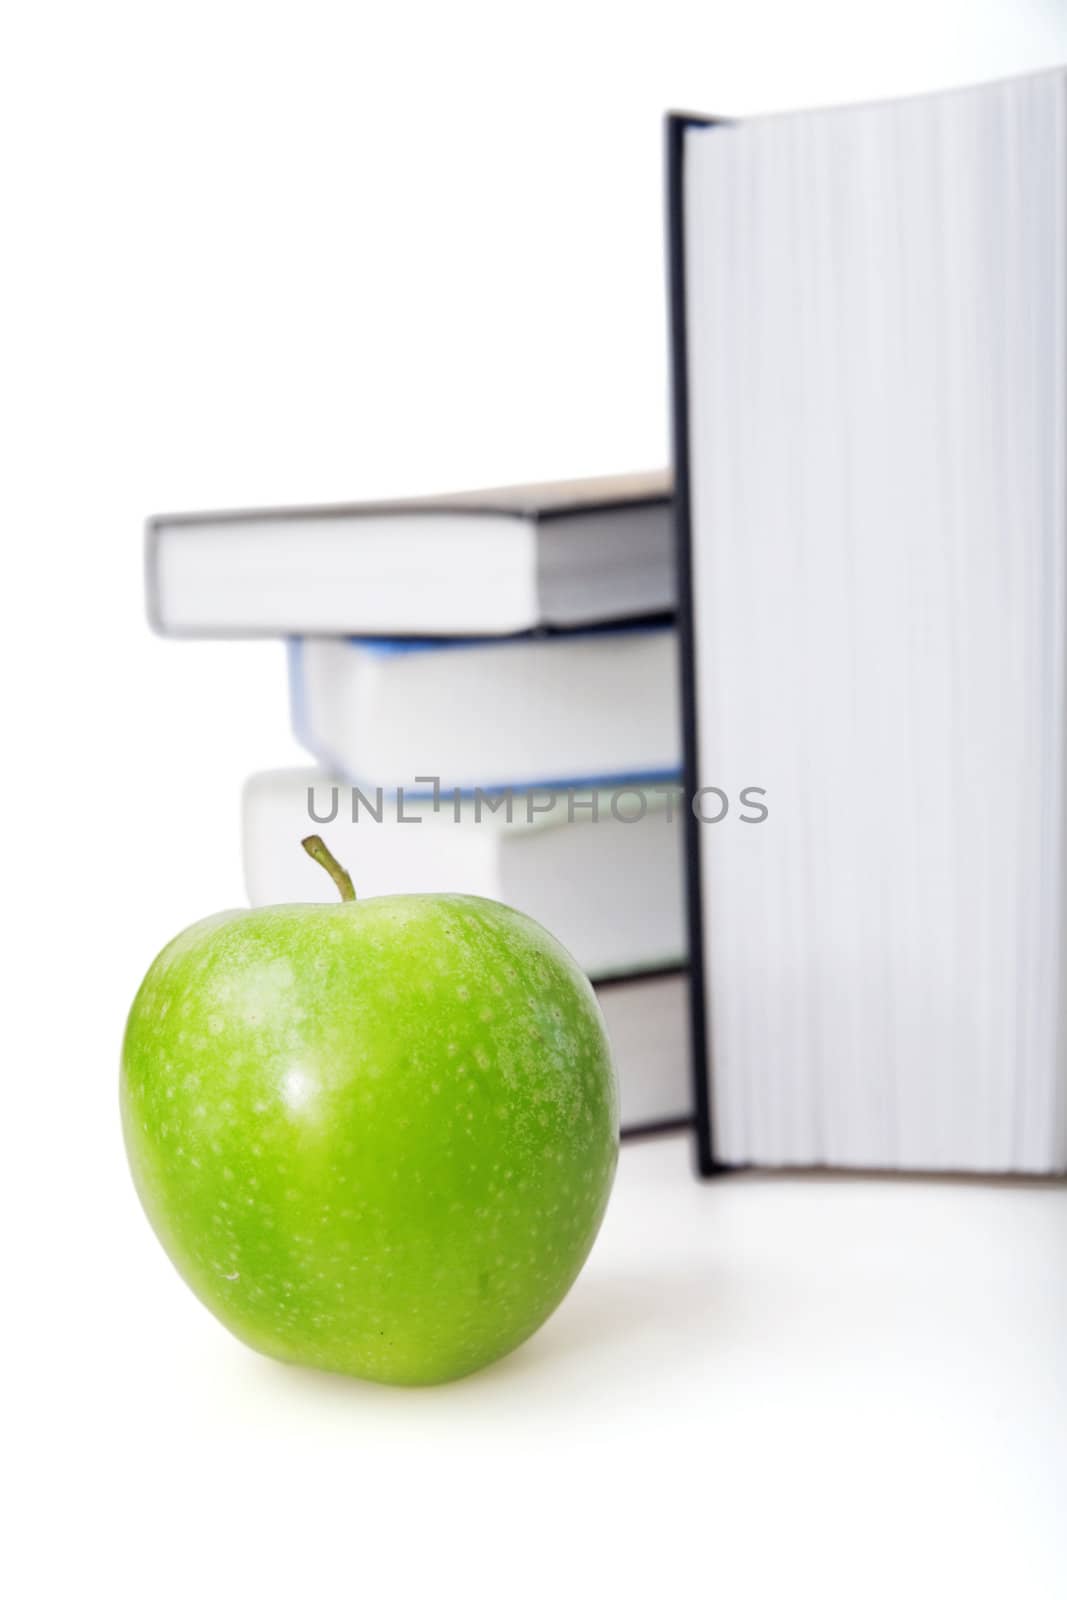 Bright green apple and books on a background